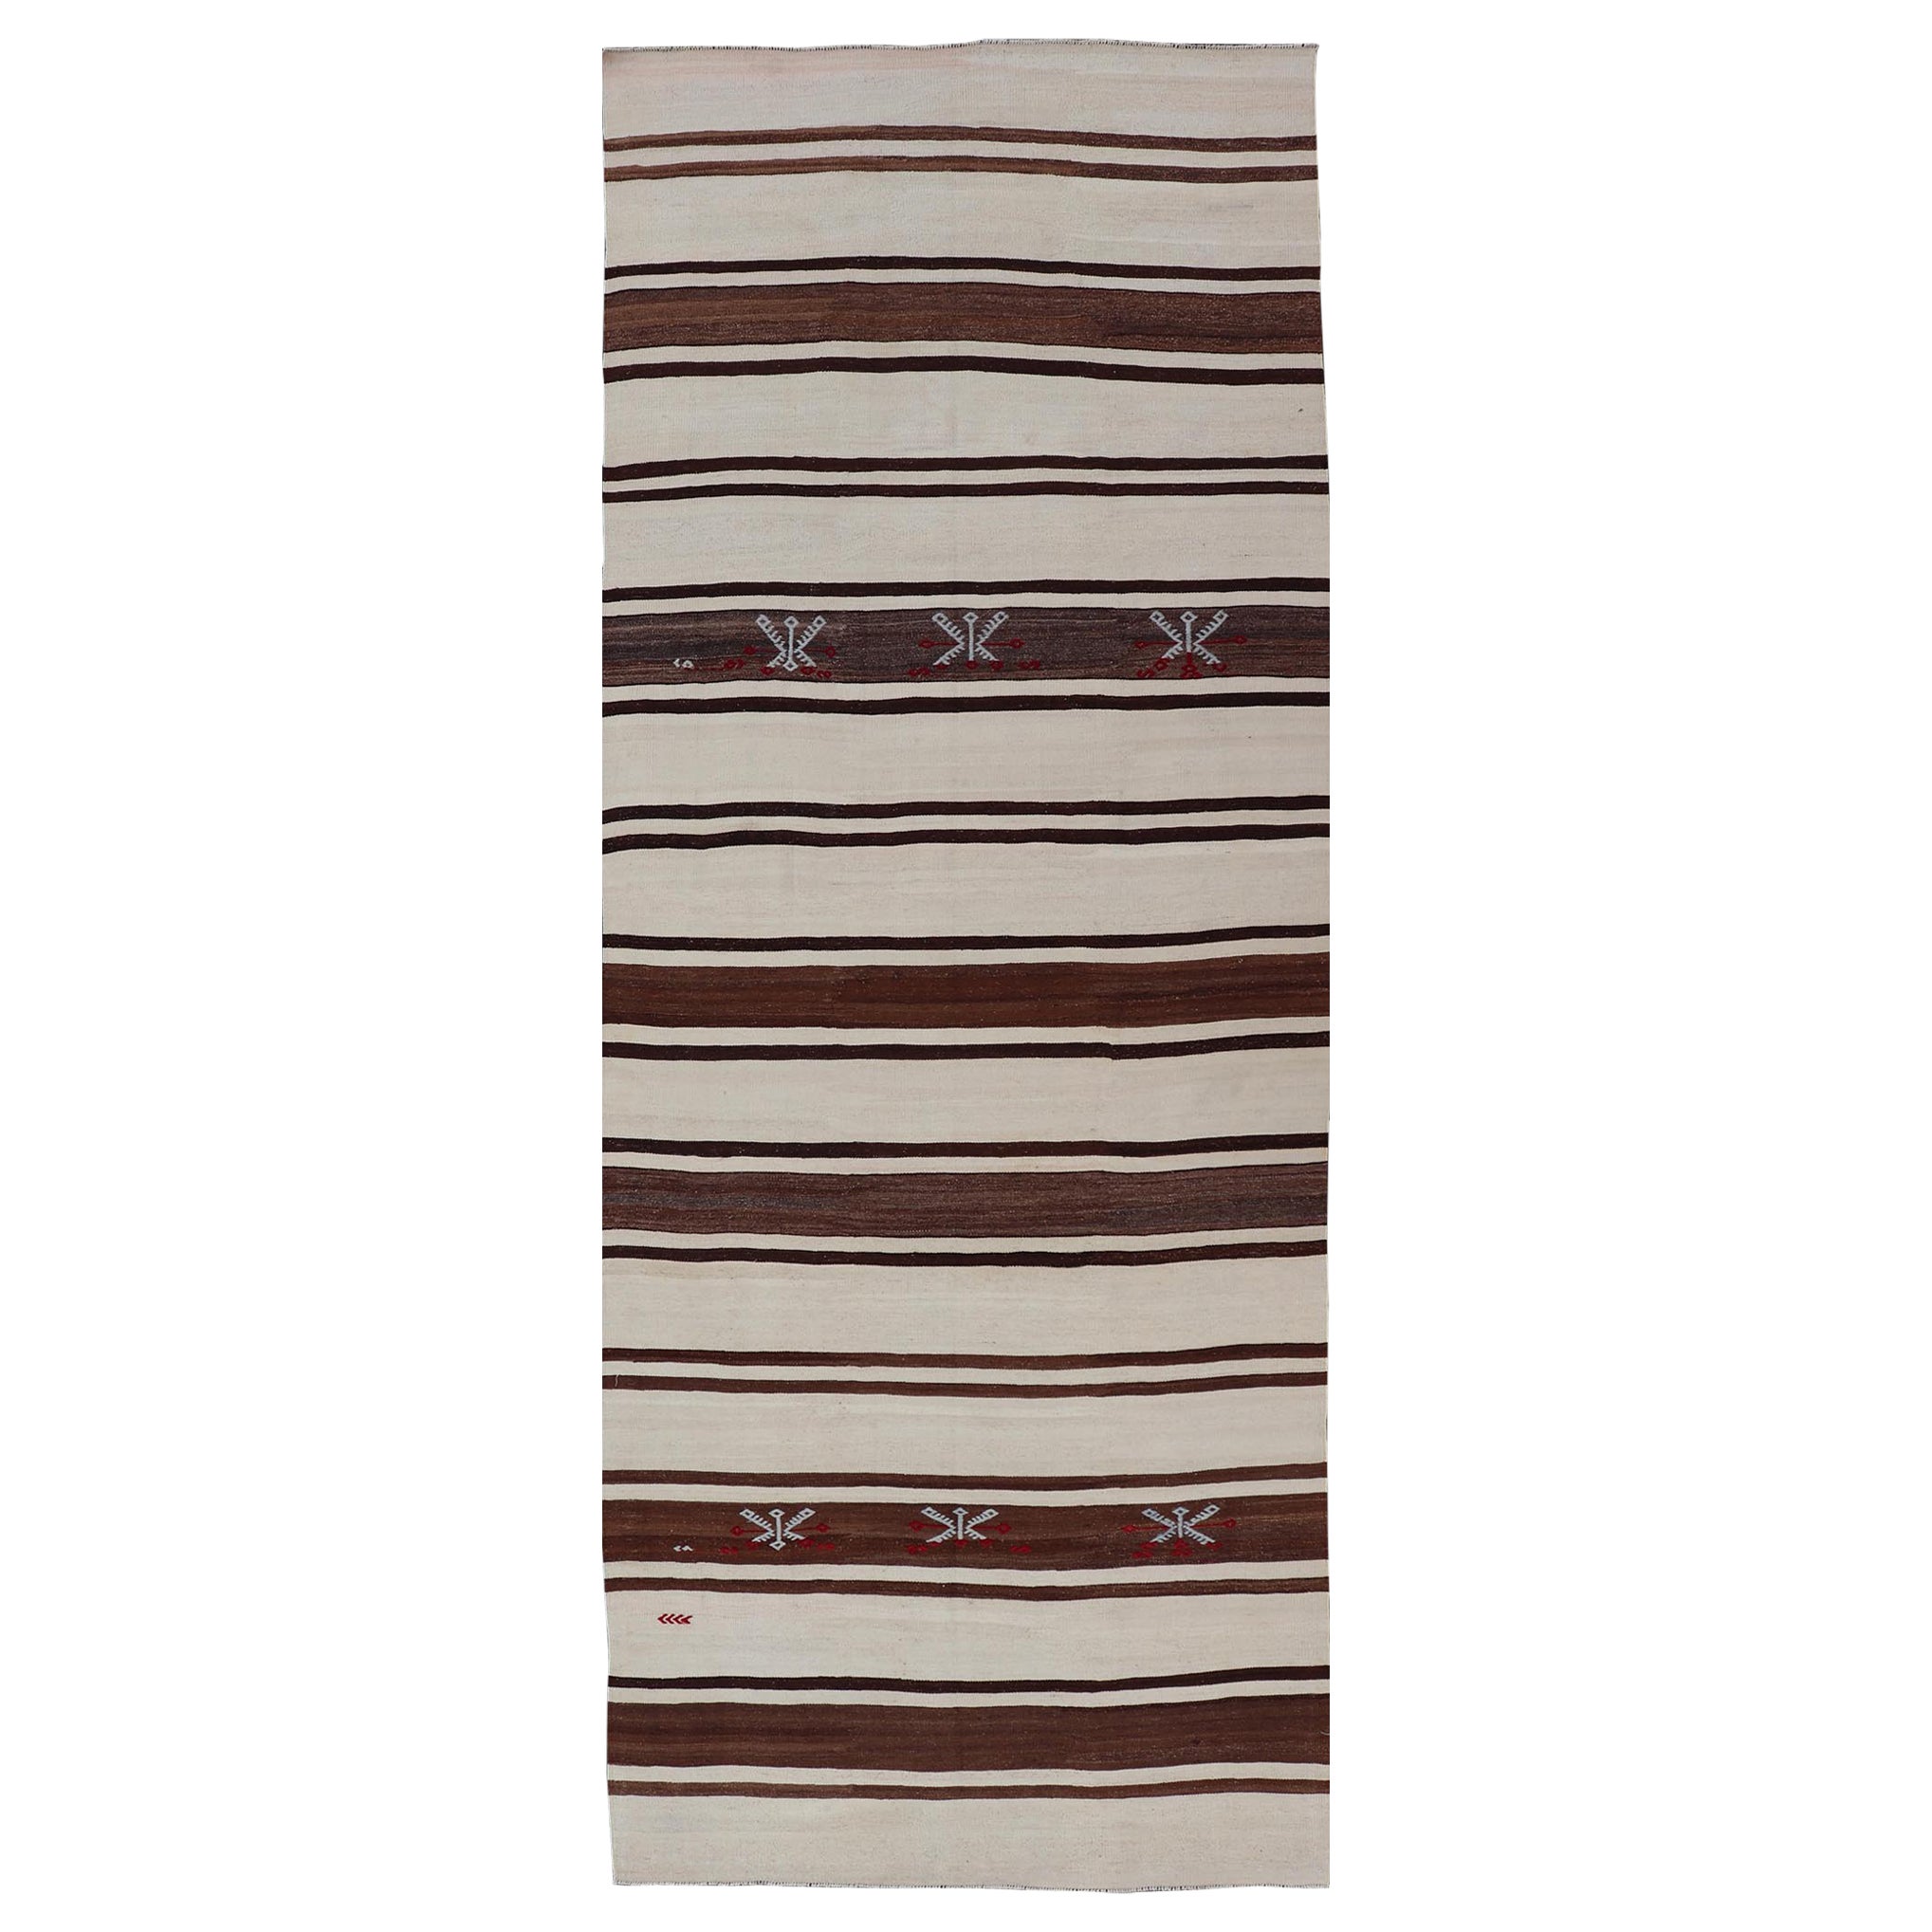 Turkish Vintage Flat-Weave in Shades of Brown and Ivory with Stripe Design